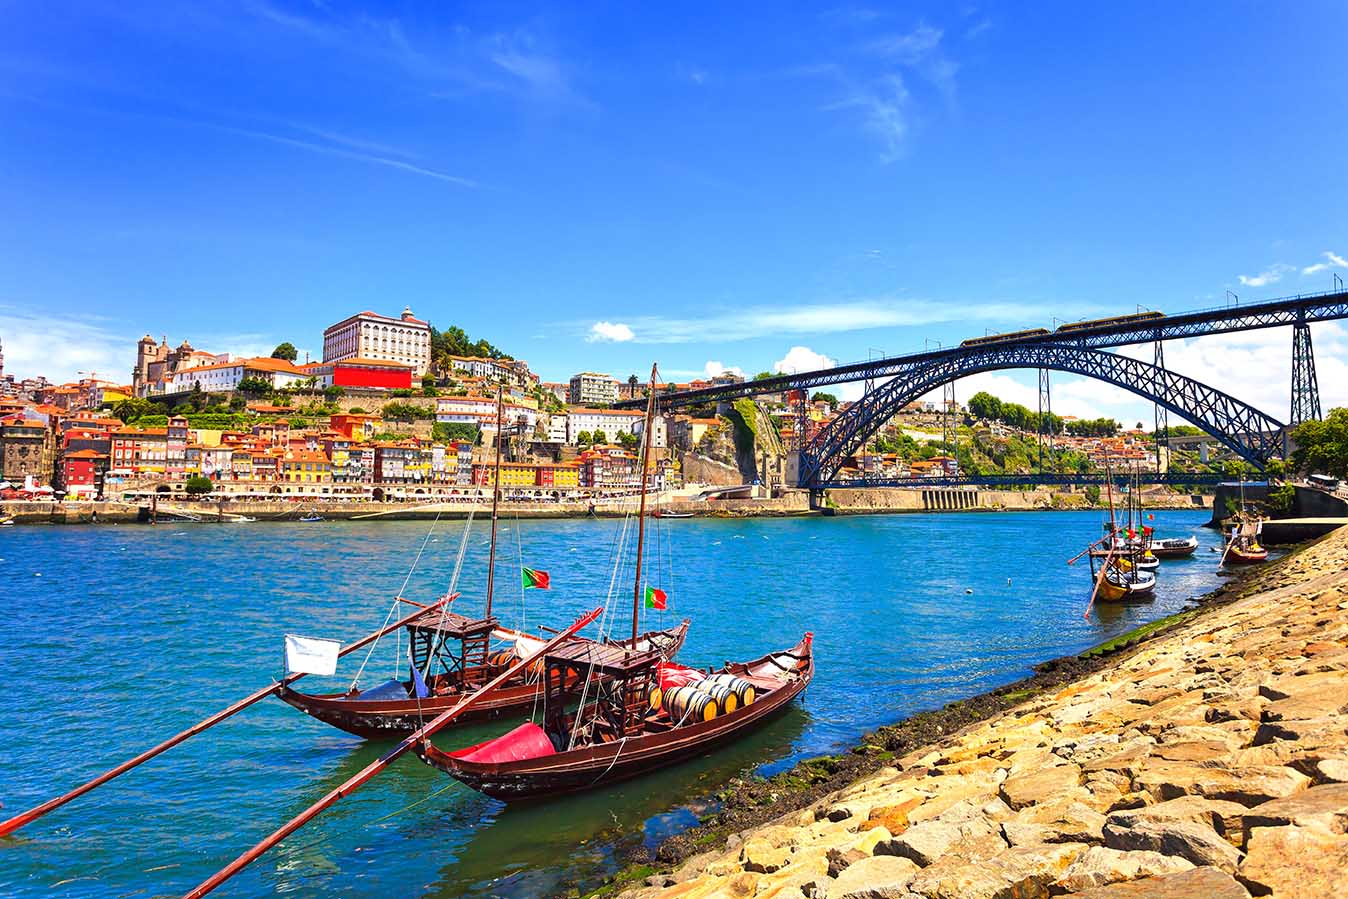 25 things to do in porto destinations europe - 20 most instagram worthy locations in portugal centro portugal